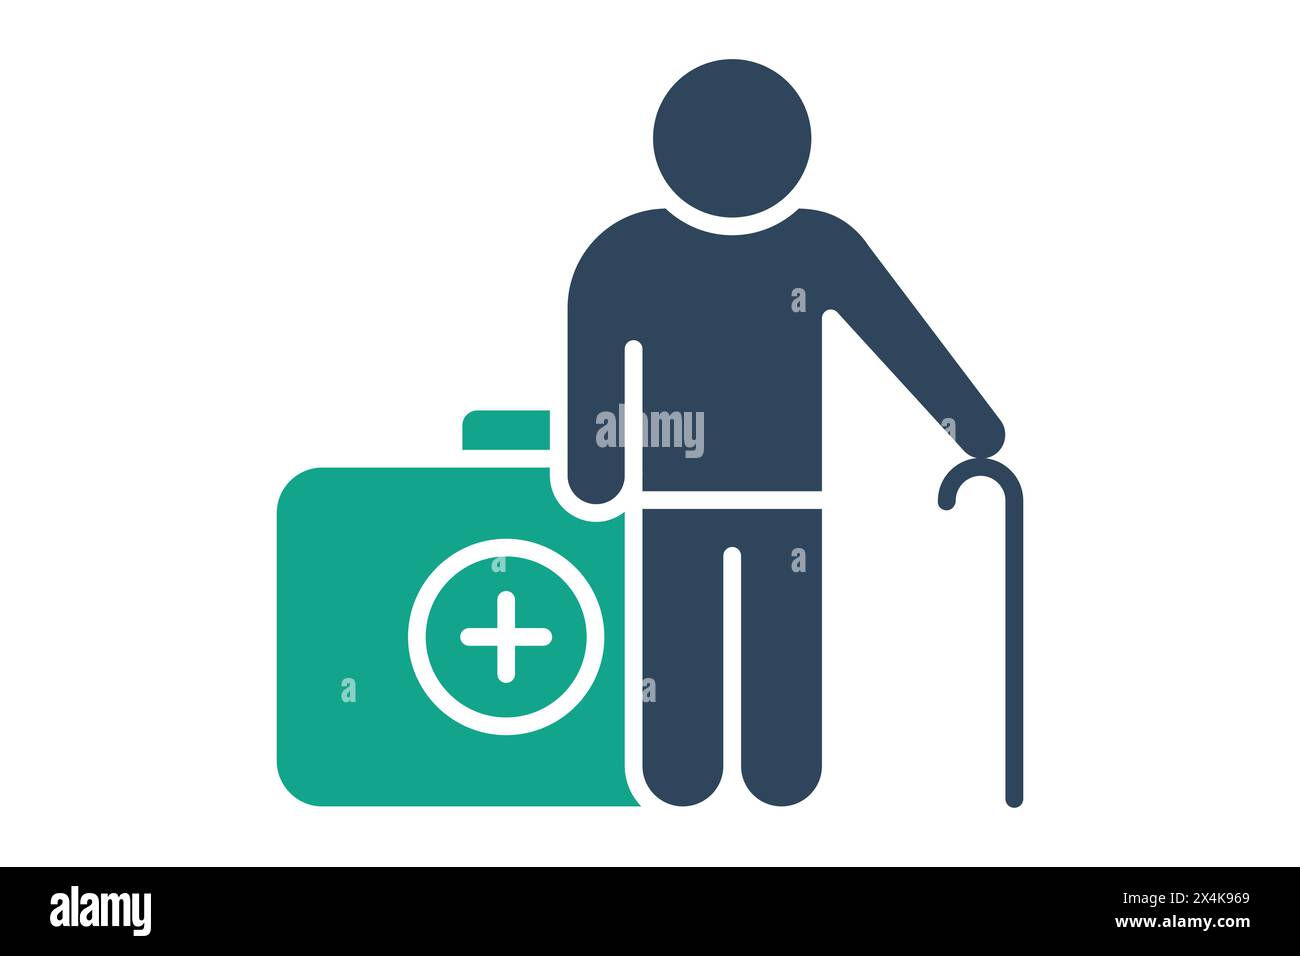 health icon. elderly using walking stick with health box. icon related to elderly. solid icon style. old age element illustration Stock Vector